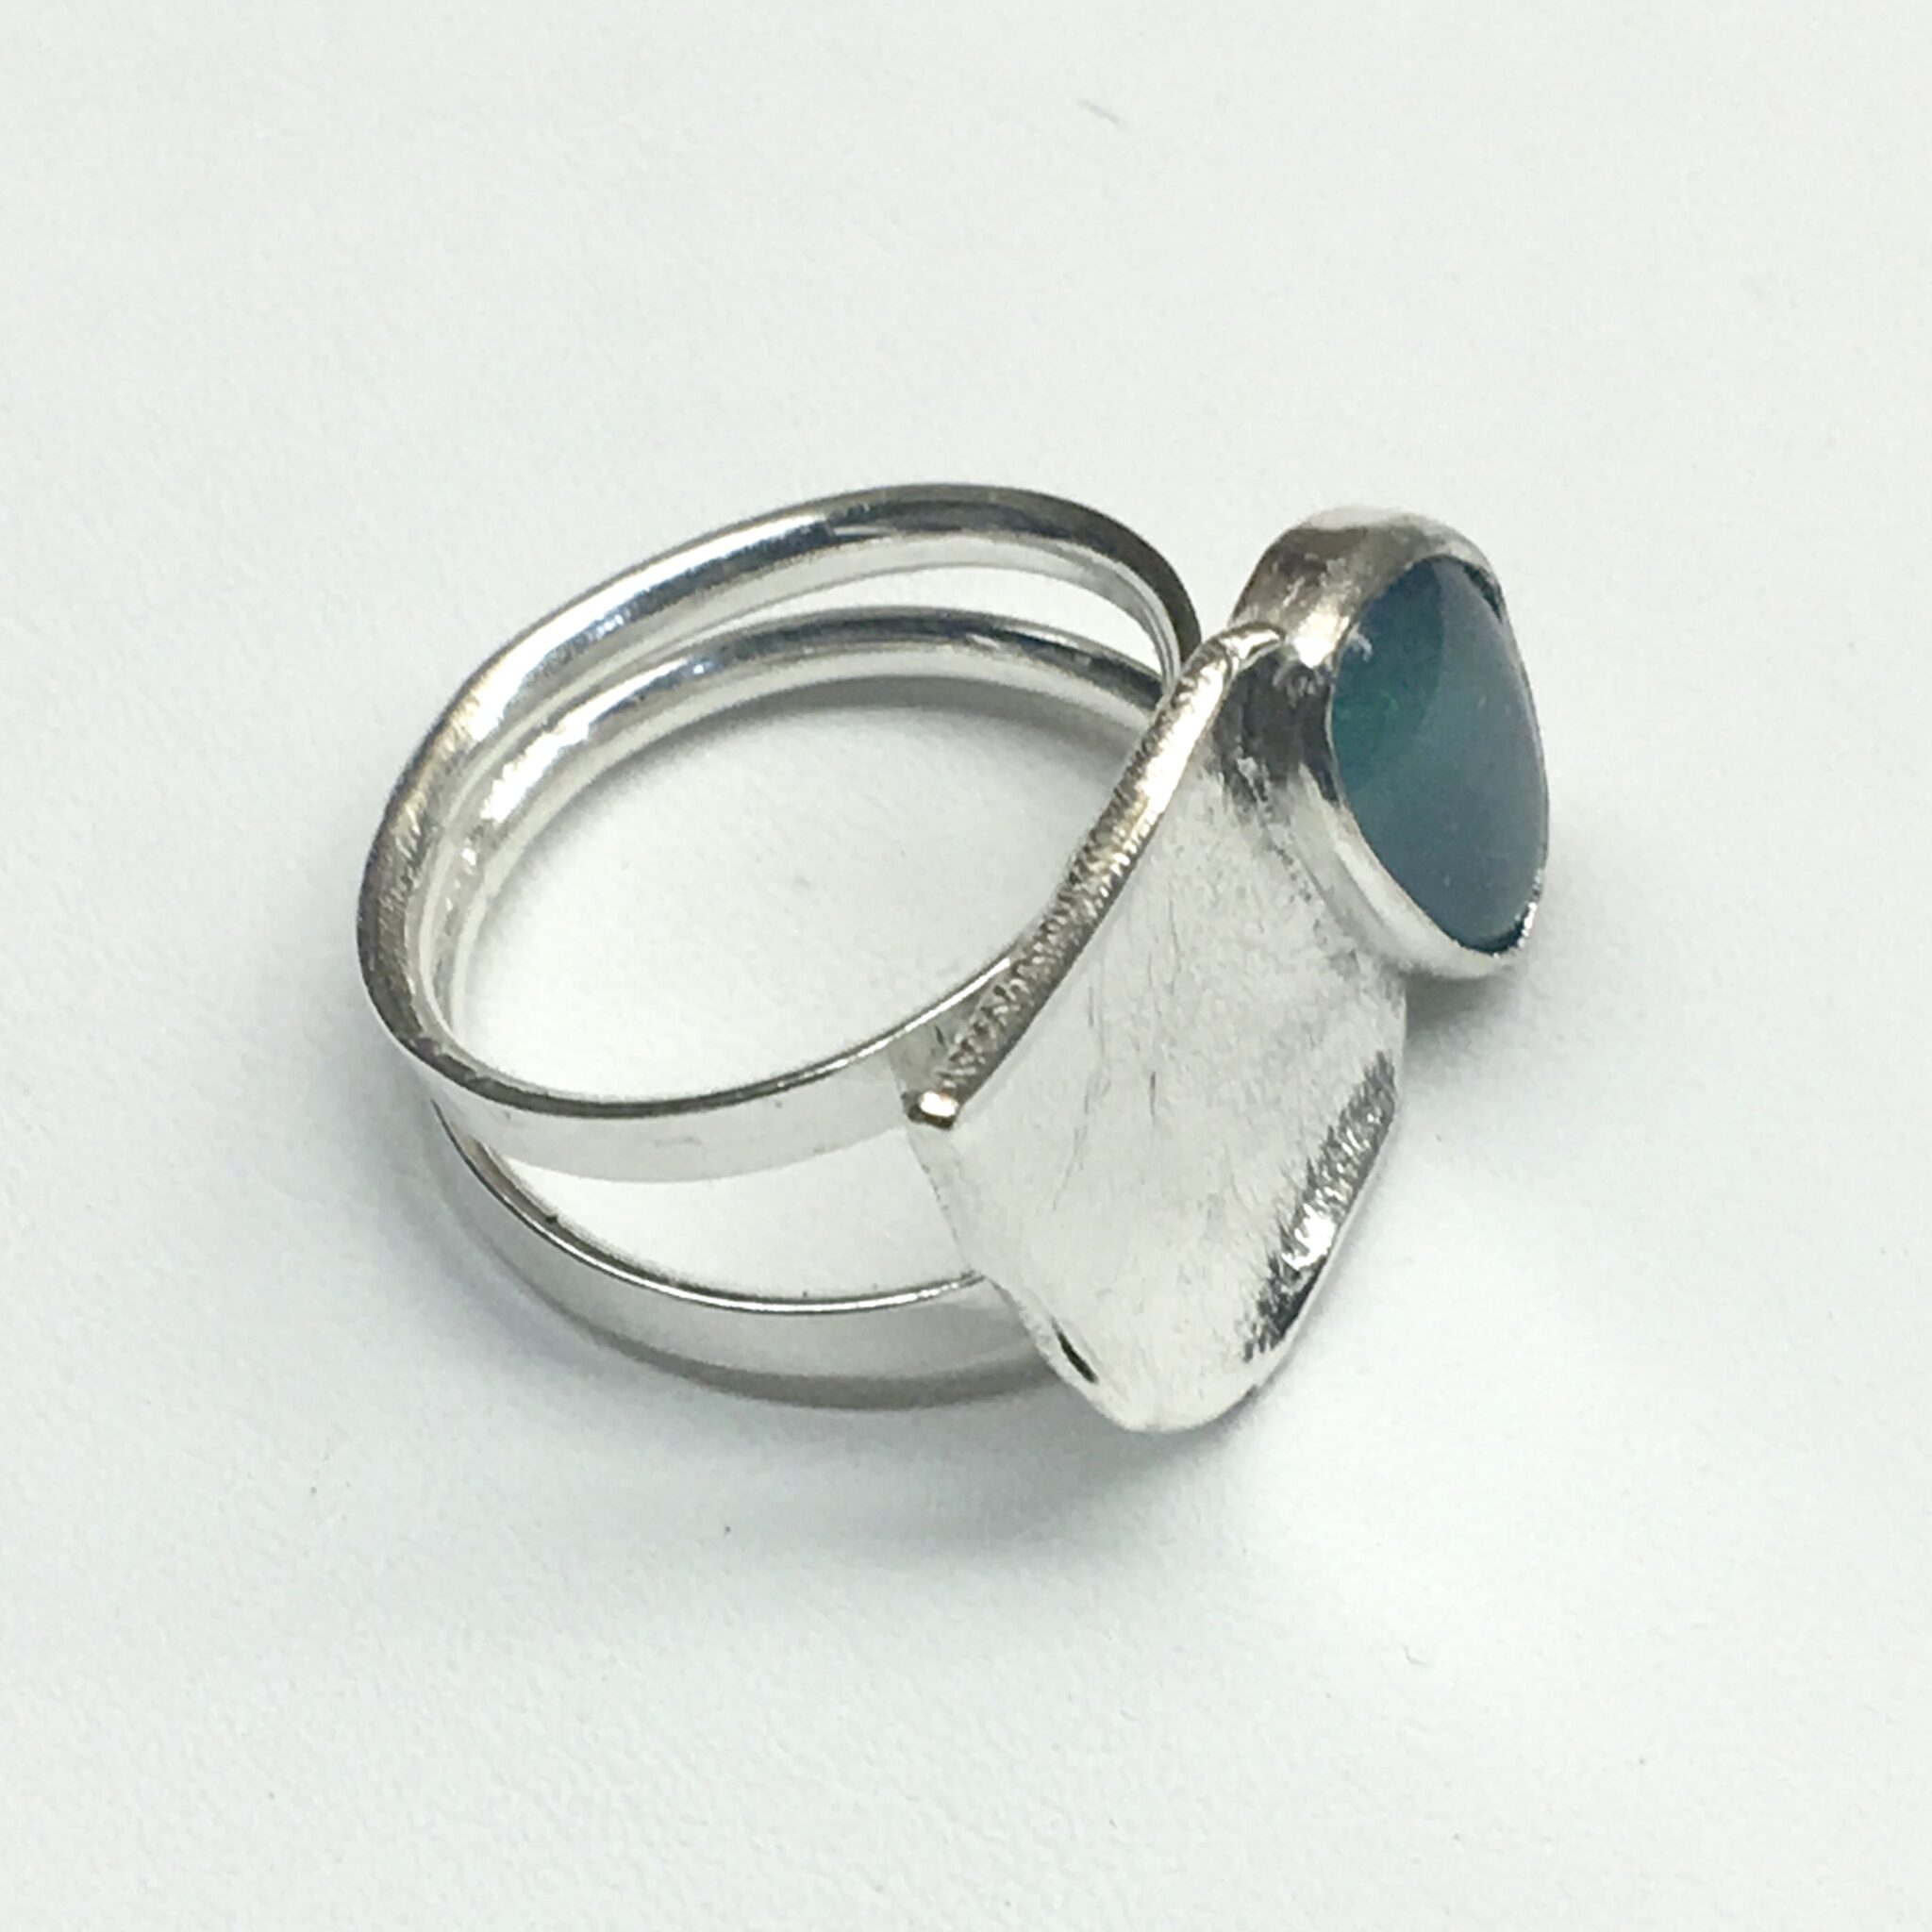 SOLD! – Opal and Reticulated Silver Ring | Silverthread Designs